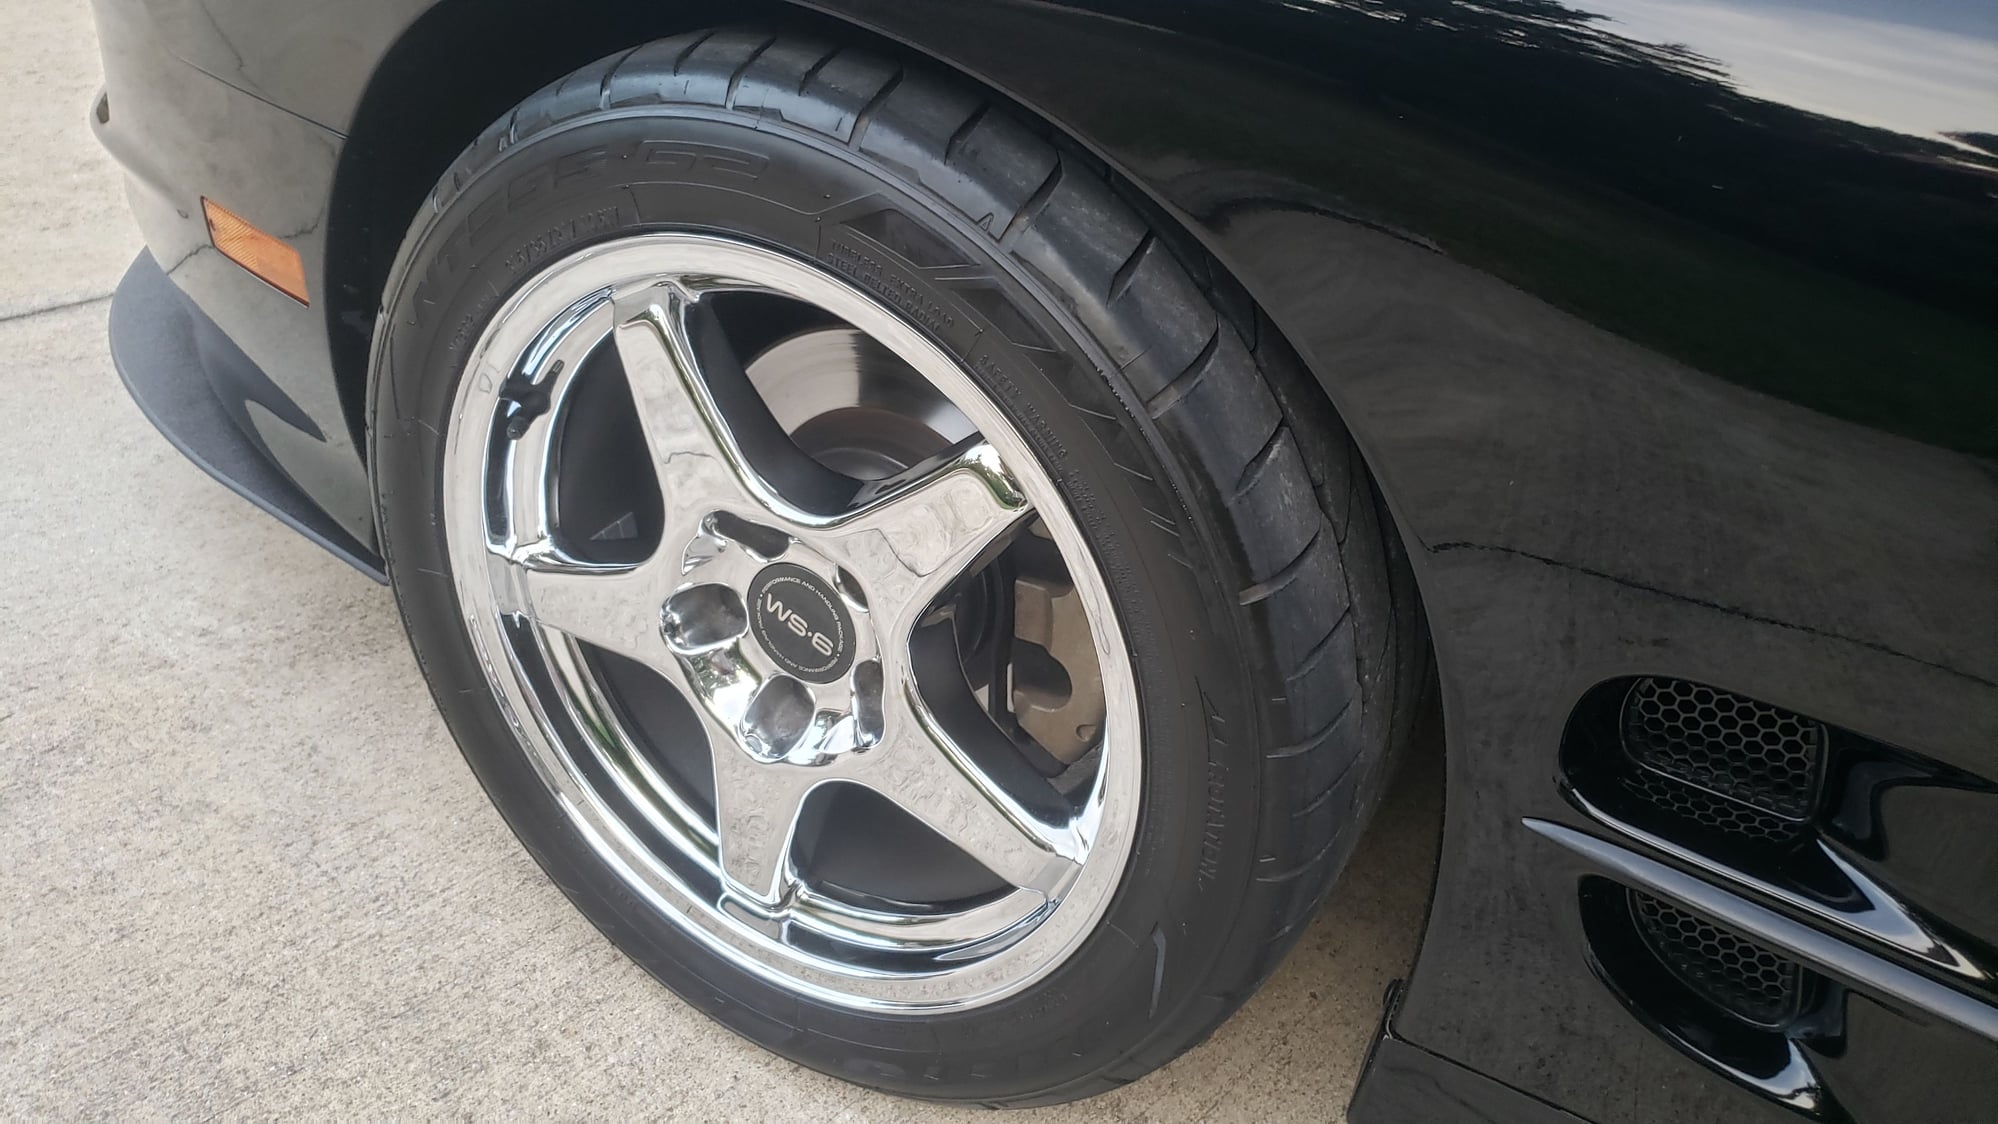 Wheels and Tires/Axles - 6 Wheels 17x11, Corvette ZR1 replica, 4 tires 315-35-17, fits 4th gen Firebird - Used - All Years  All Models - Springfield, MO 65804, United States